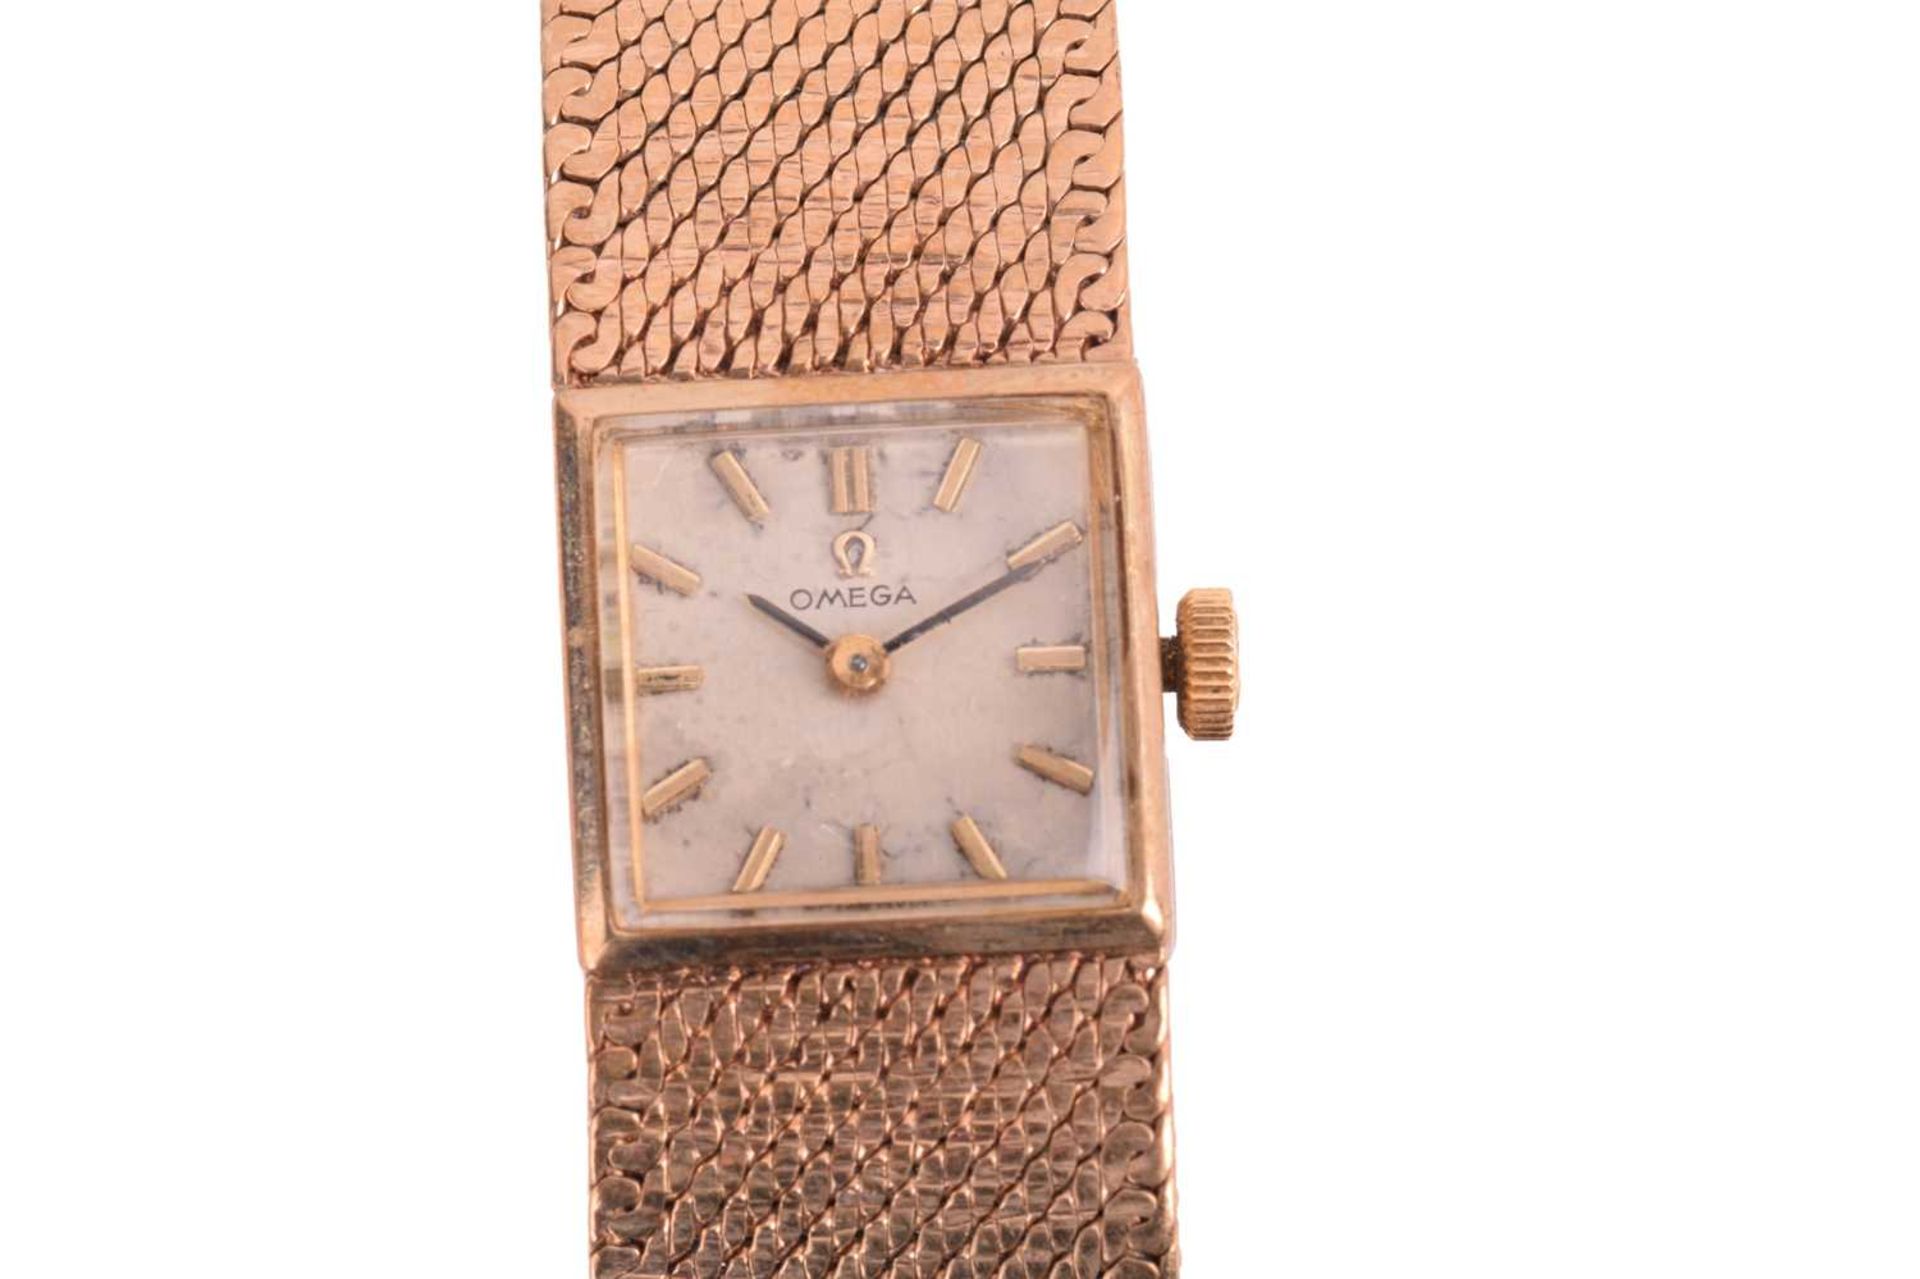 An Omega 9ct gold lady's dress watch, featuring a Swiss-made hand-wound mechanical movement in a - Image 3 of 6